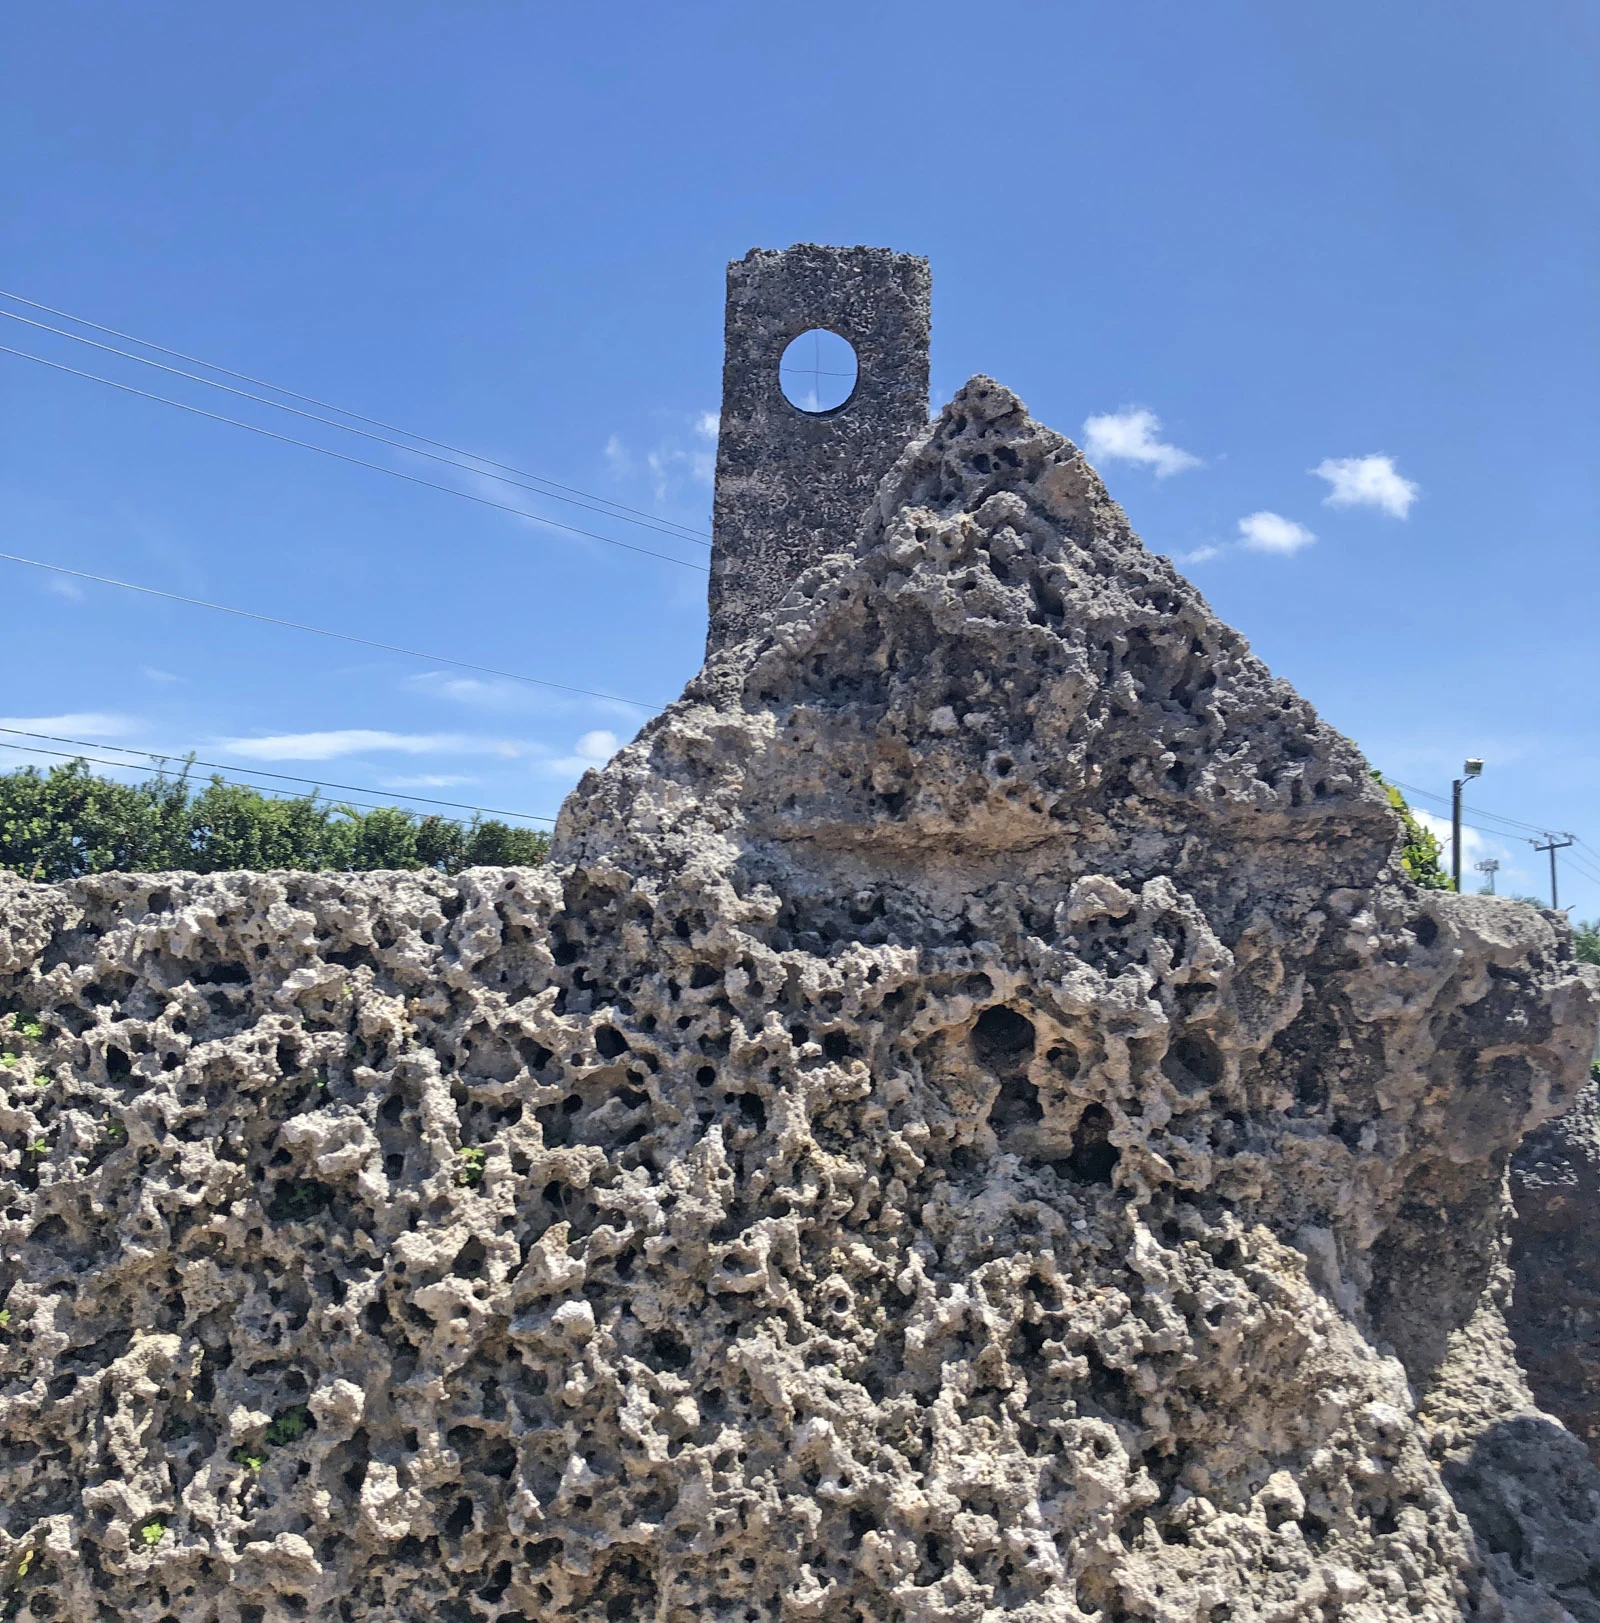 coral castle Polaris Telescope 7389 Coral Castle: 15 things to amaze you at mysterious 'work of art' in Homestead